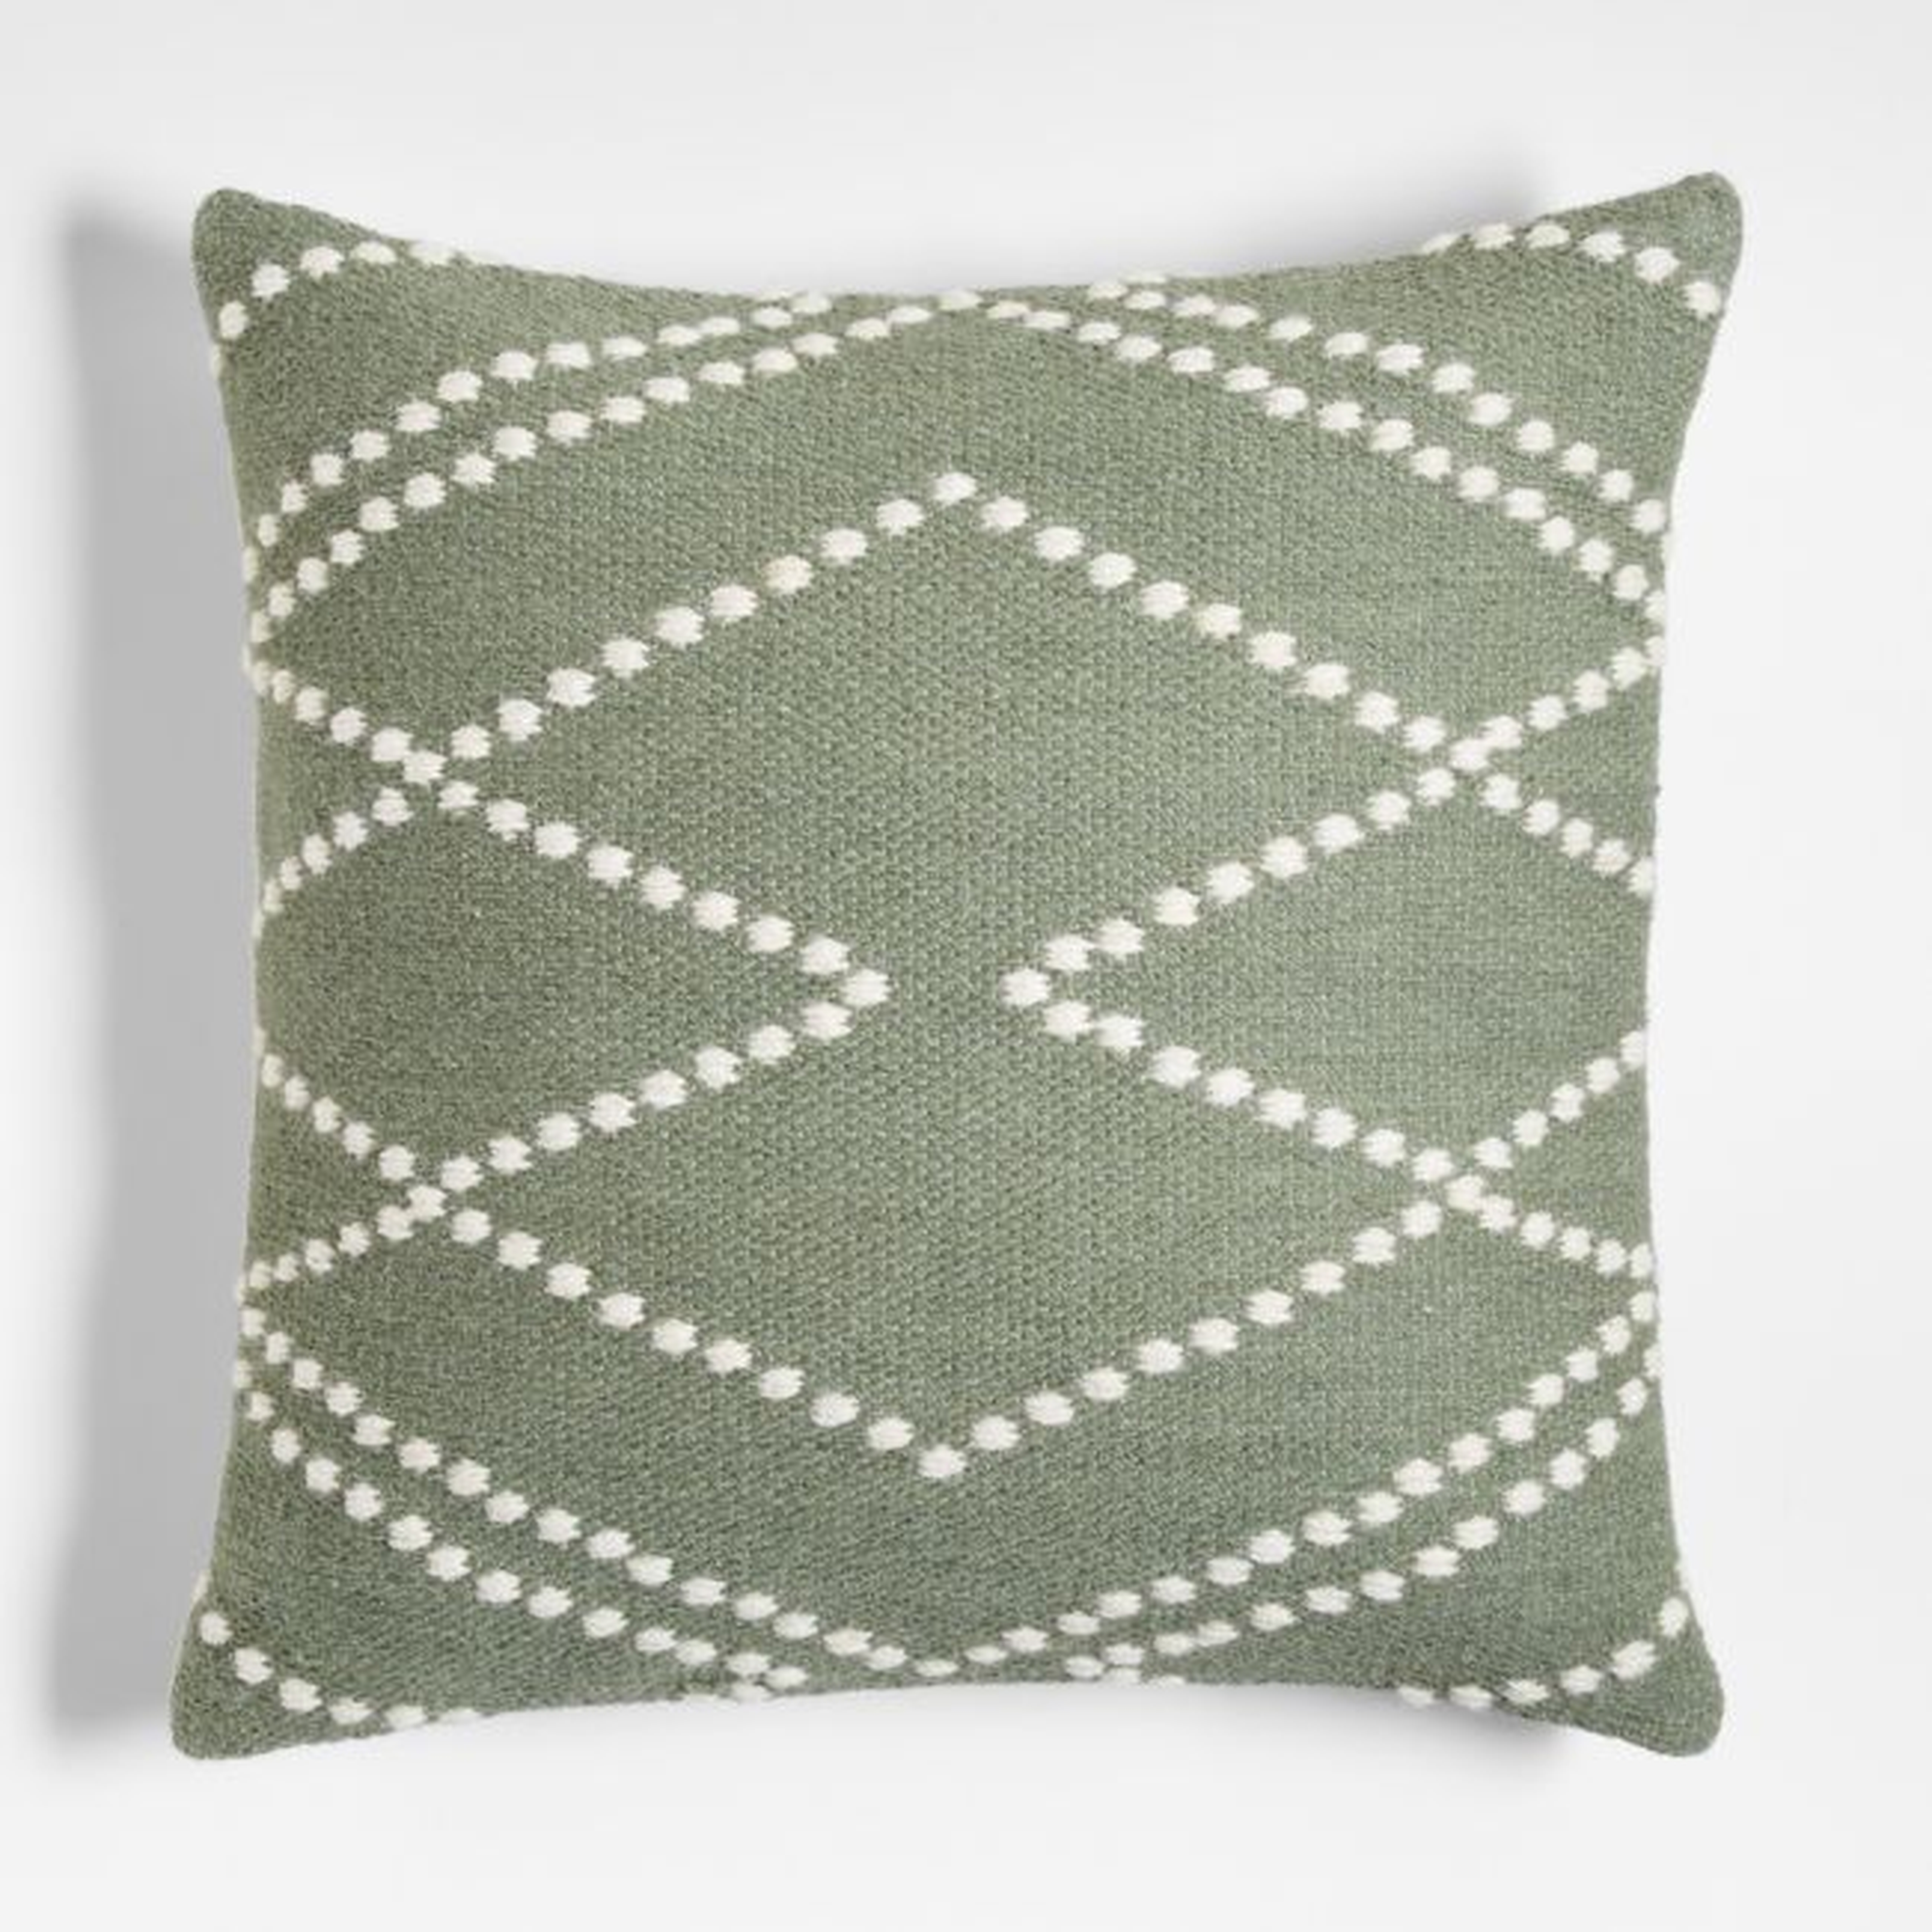 Byzan 23"x23" Sage Kilim Throw Pillow with Down-Alternative Insert - Crate and Barrel